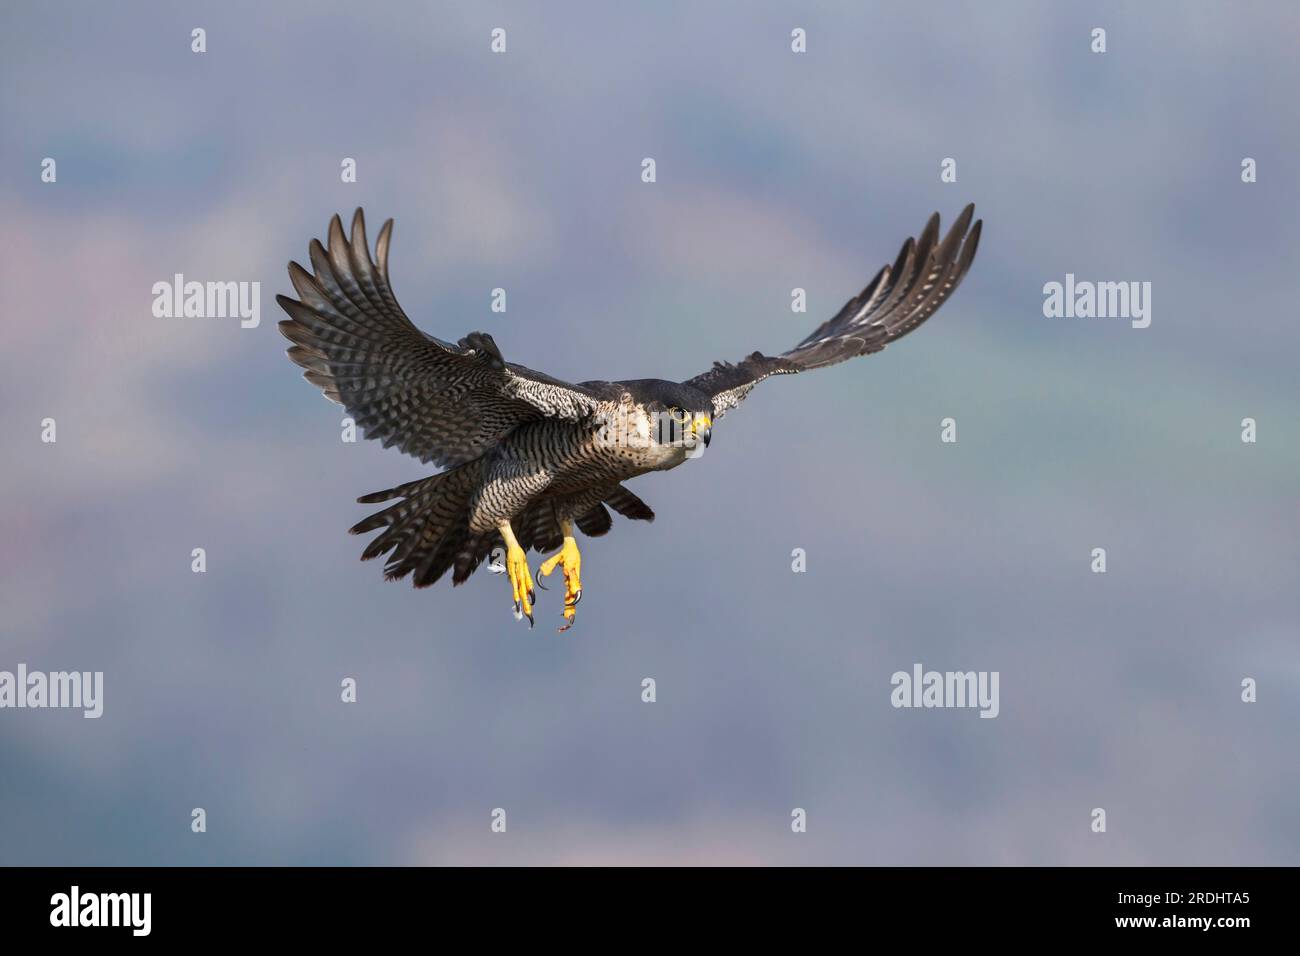 A close up of a Peregrine Falcon in flight with its wings and talons outstretched. Falco peregrinus. Stock Photo